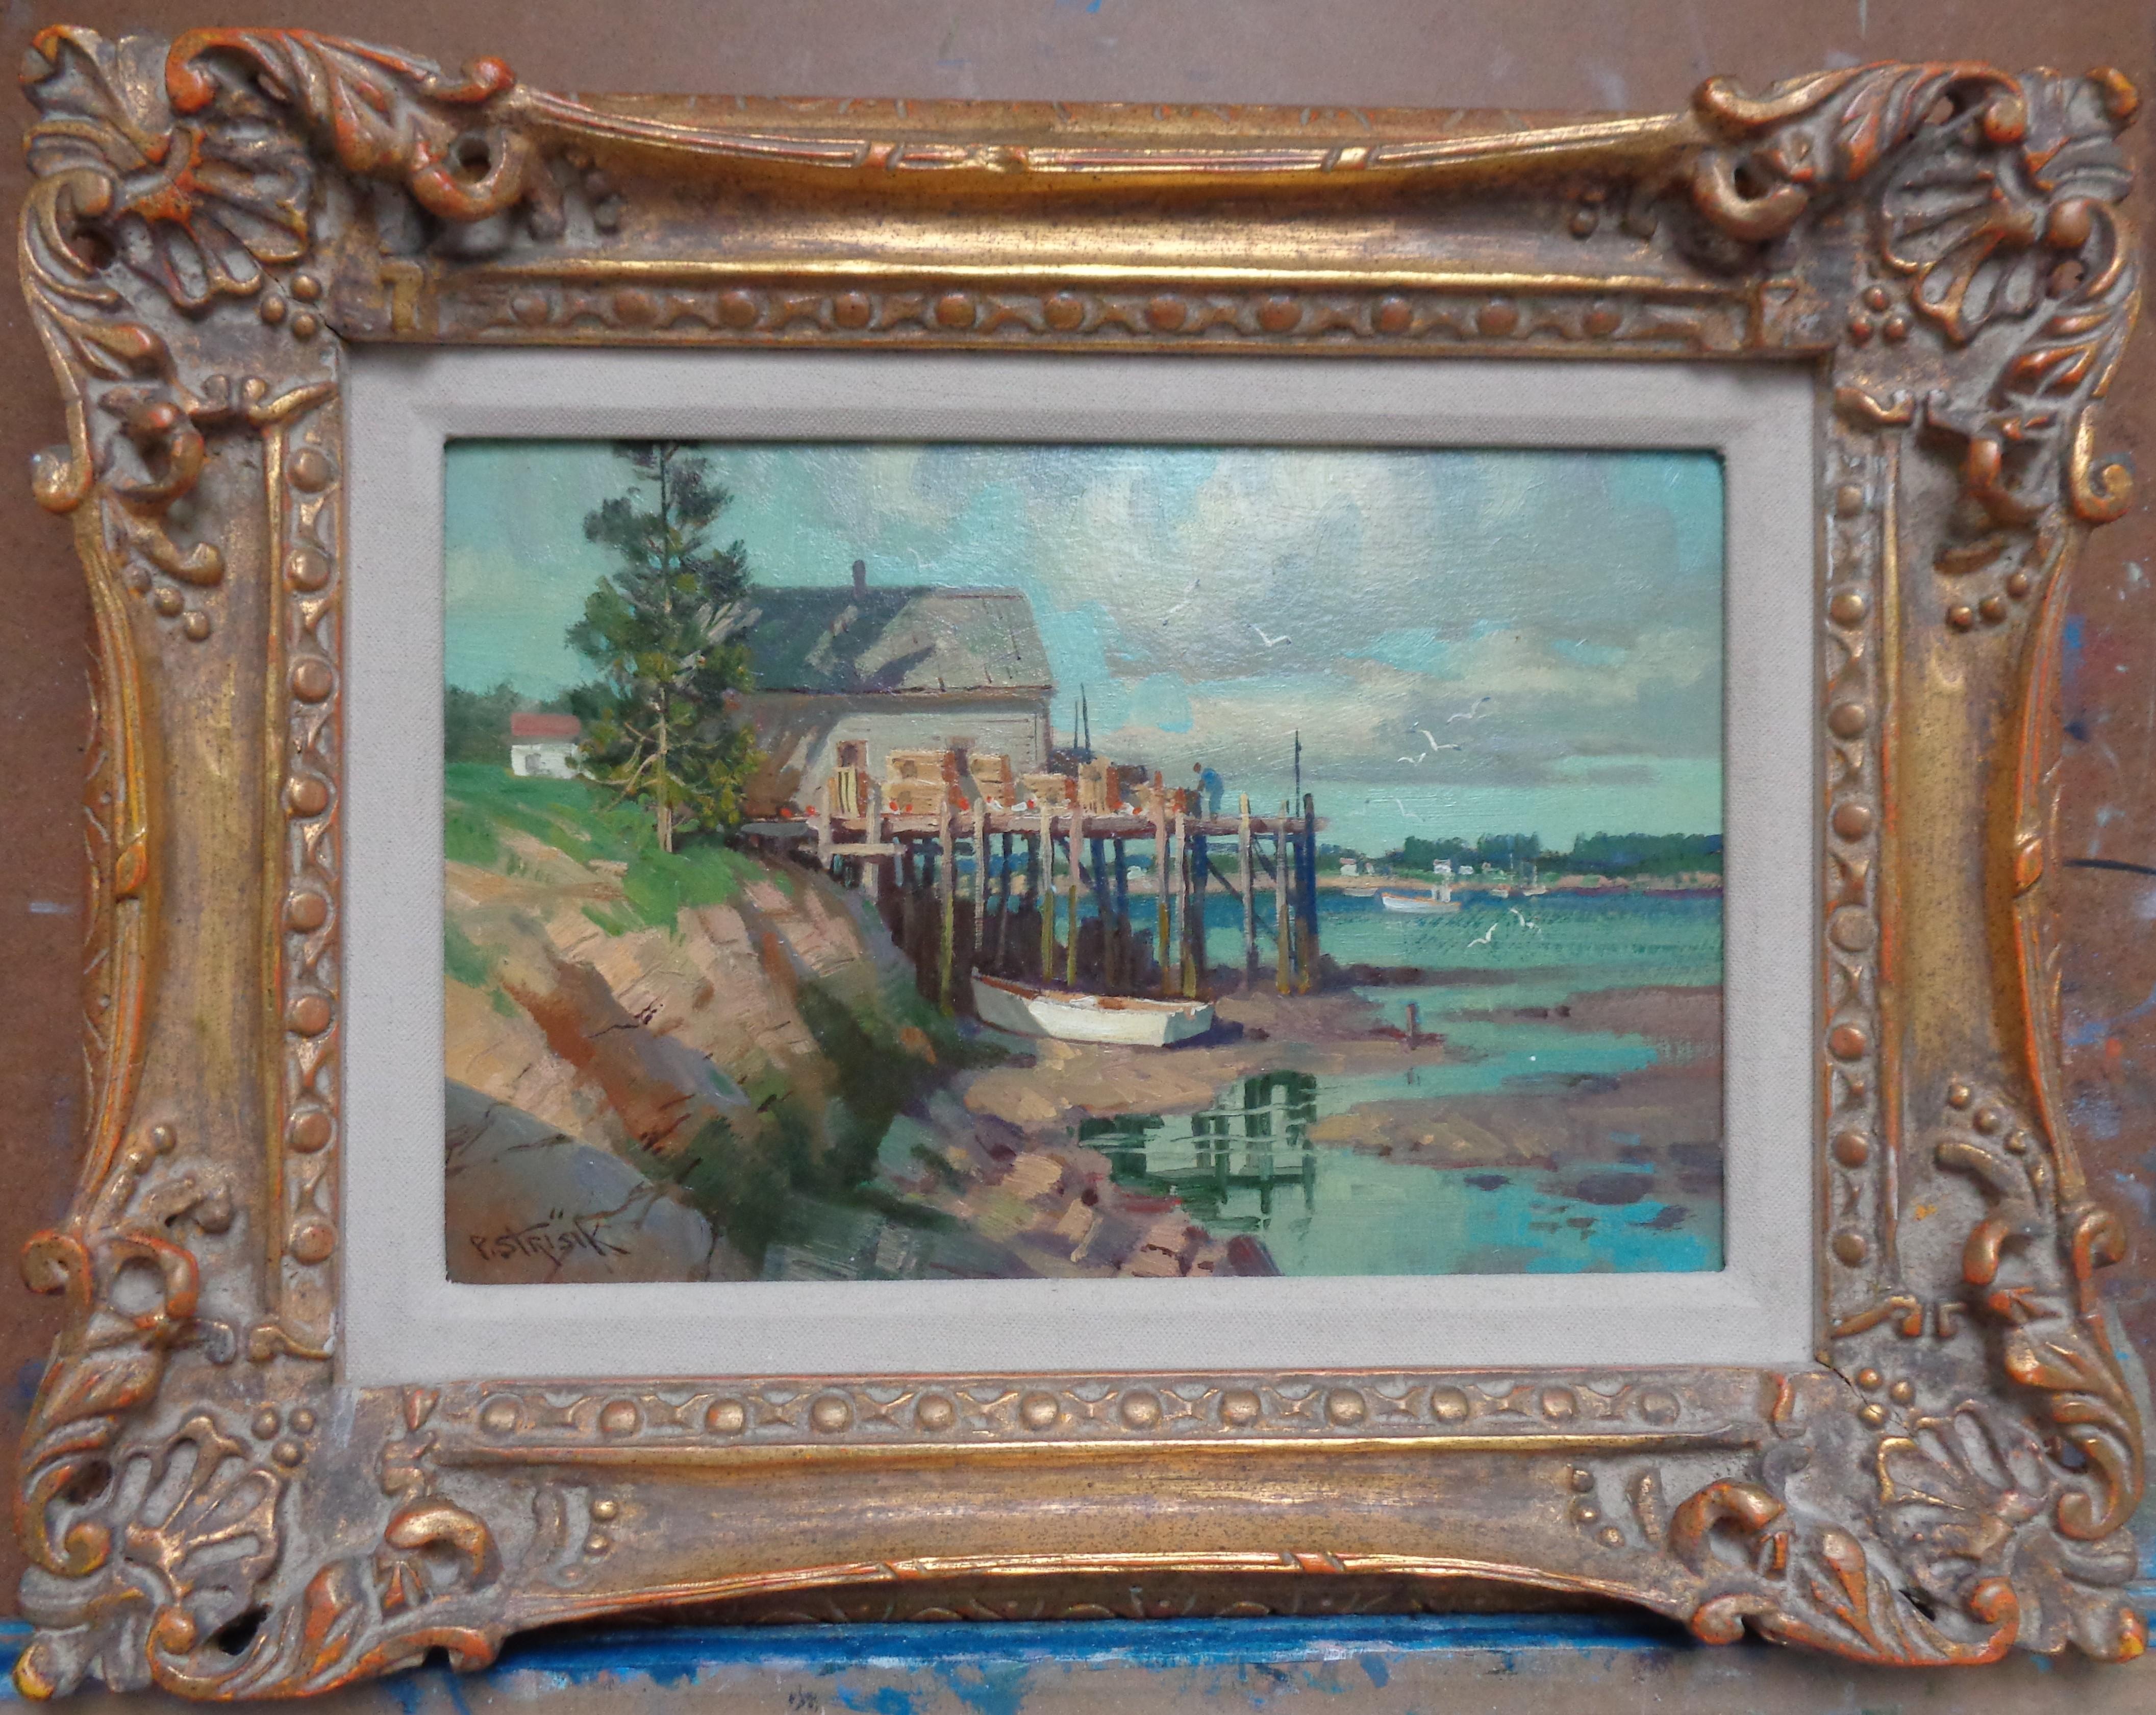 Morgan's Wharf Maine
8 x 12 oil/masonite panel
Paul Strisik (April 22, 1918 – July 22, 1998) was an American plein air painter.
The painting and frame are in excellent condition but could benefit from a light professional